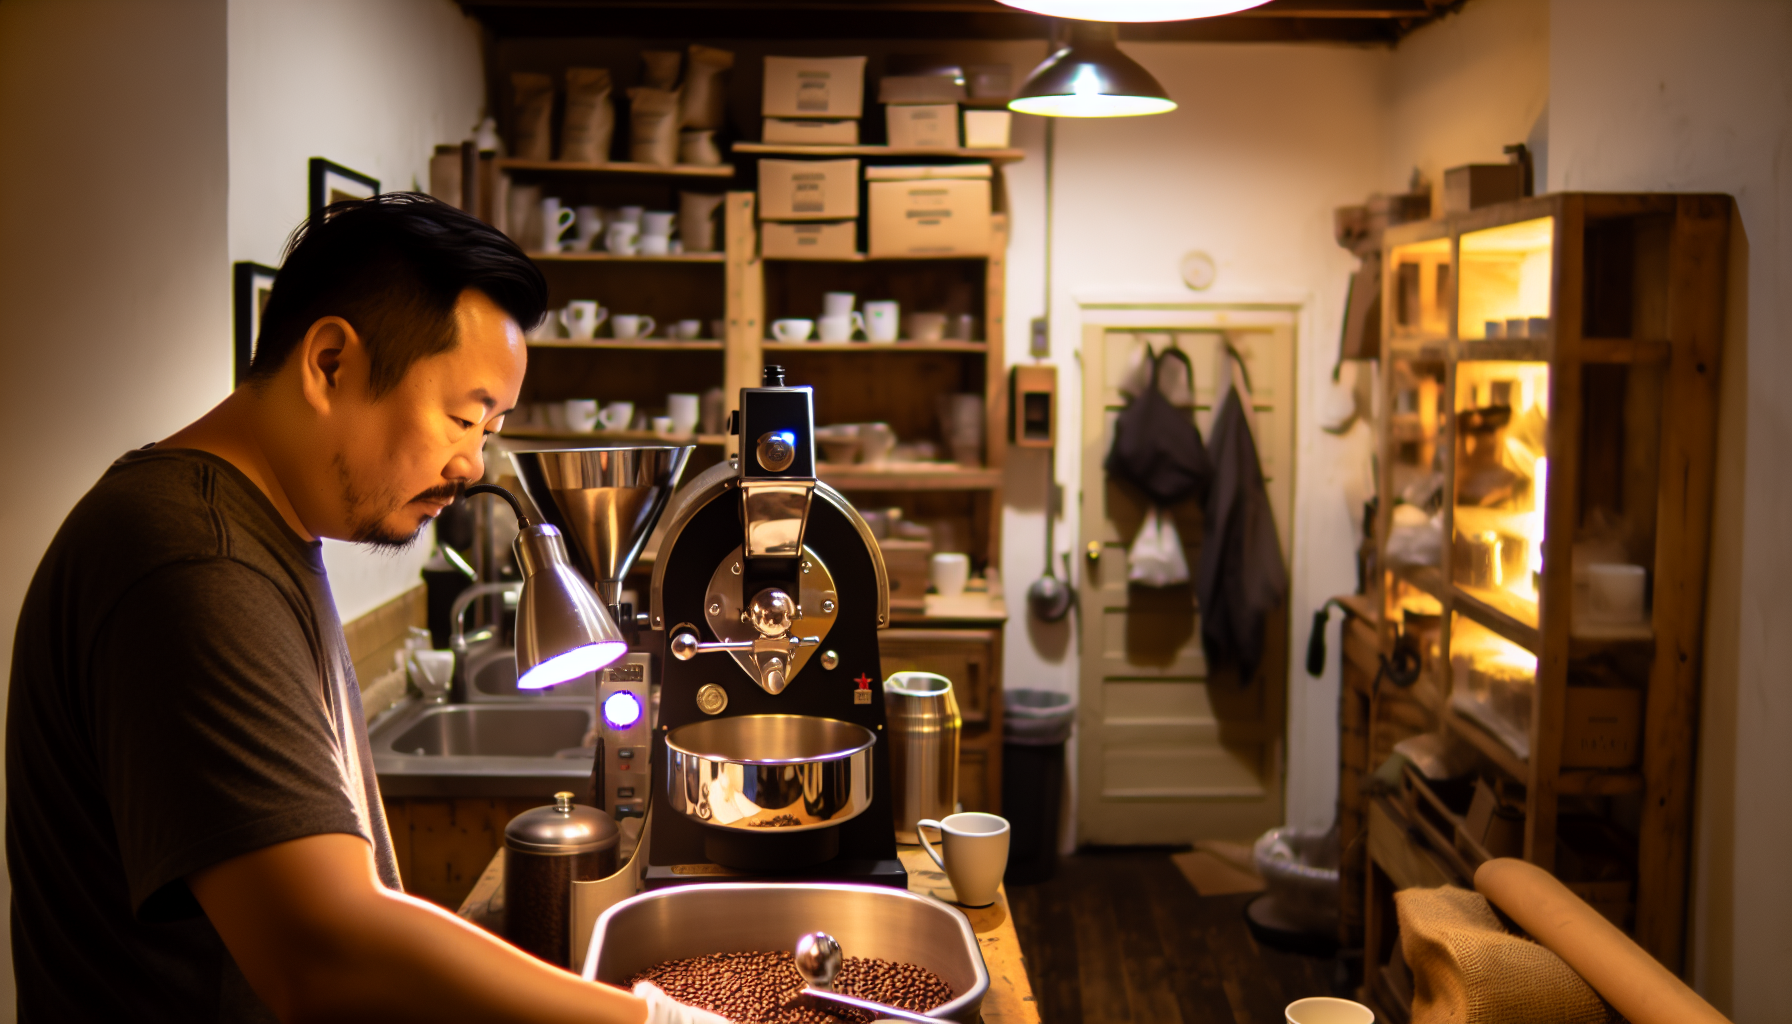 A home coffee roasting setup with expertly roasted beans, showcasing the art of roasting at home